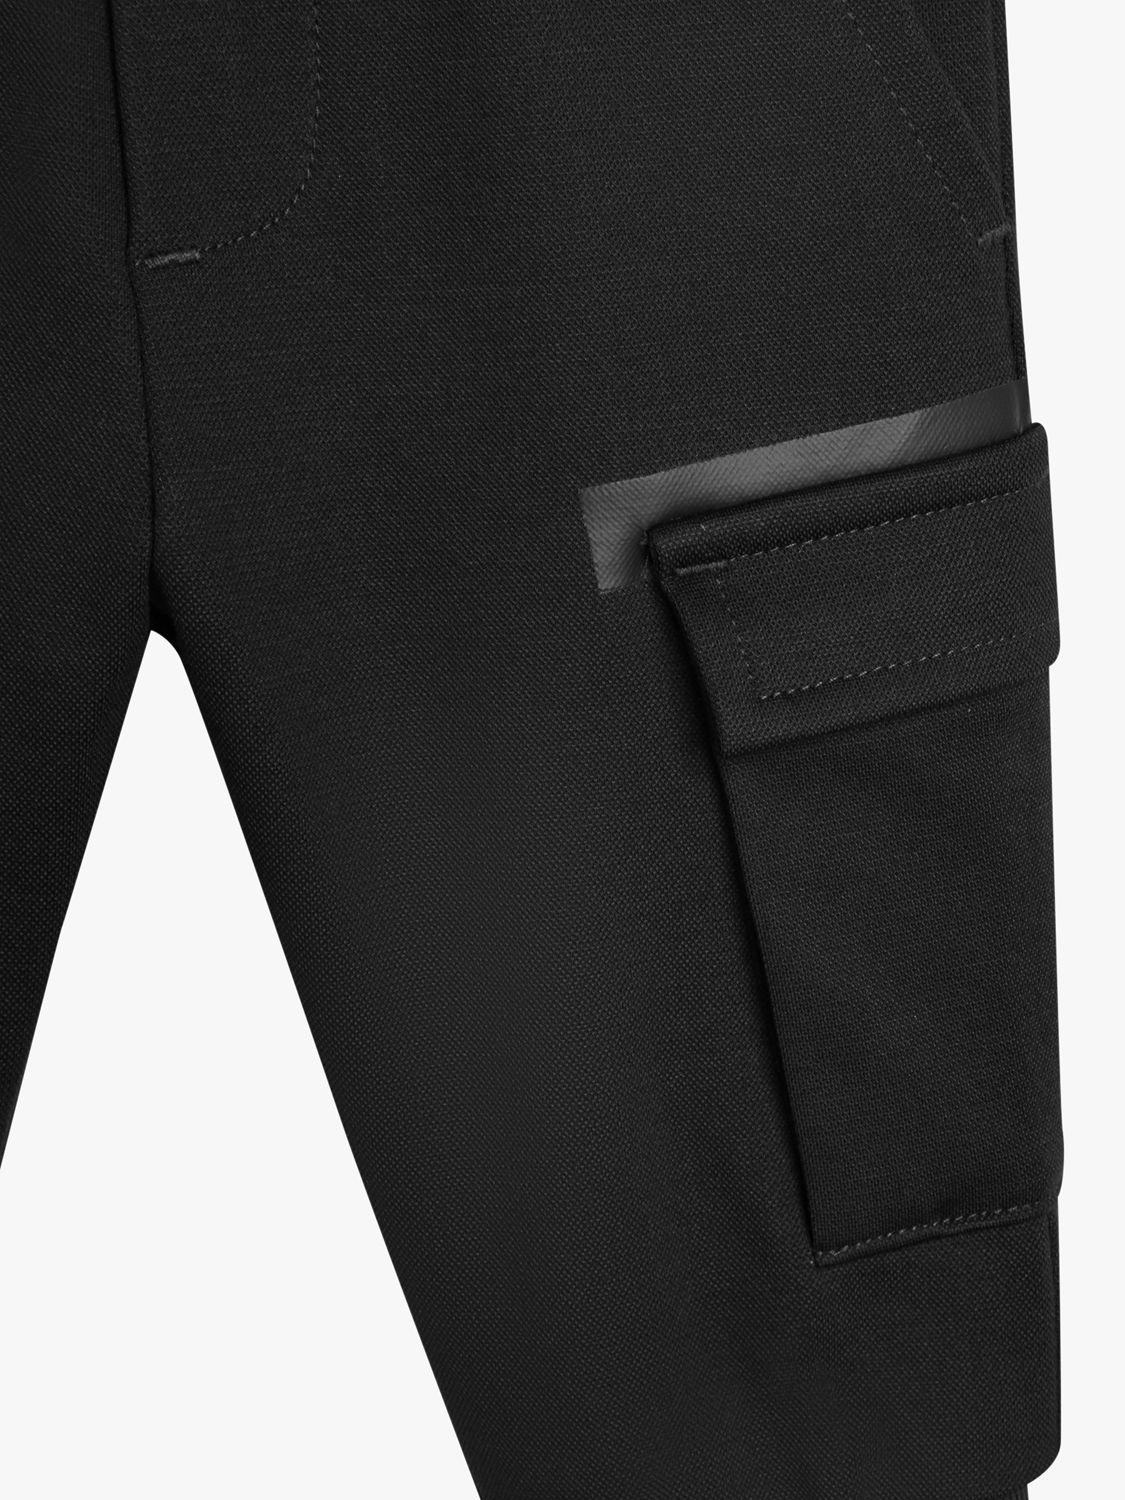 BOSS Baby Flap Pockets Trousers, Black, 6 months